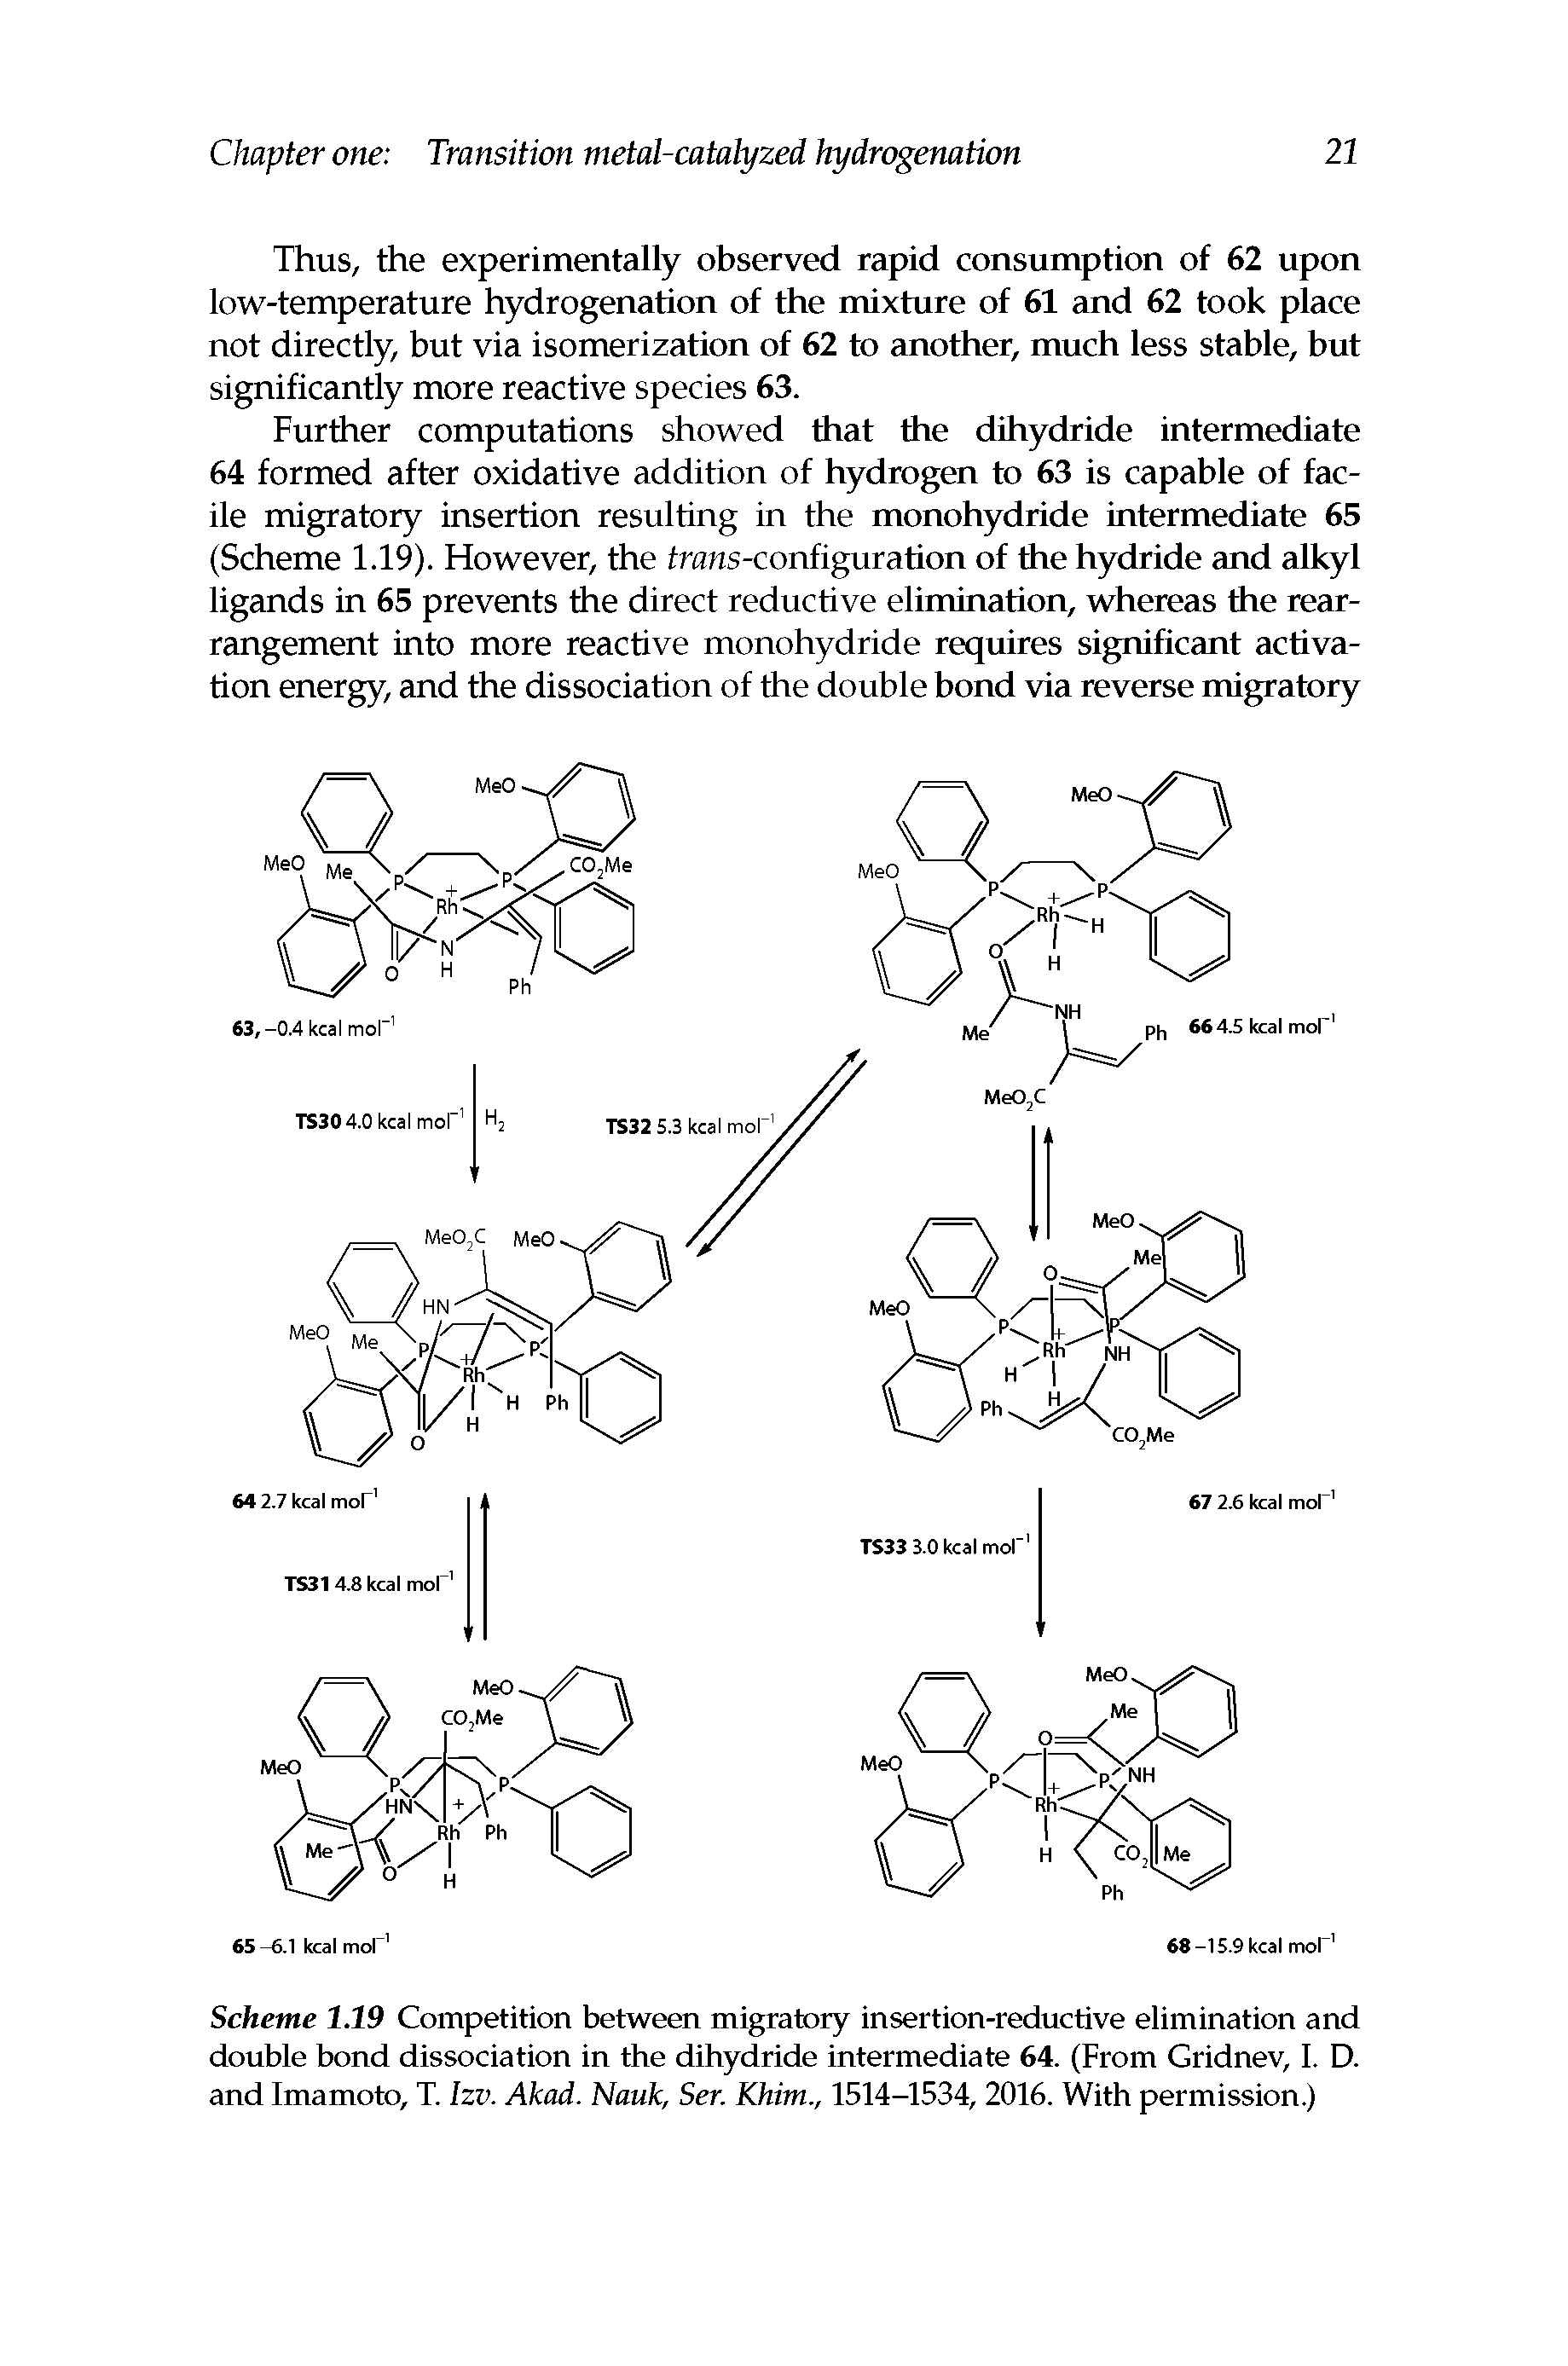 Scheme 1.19 Competition between migratory insertion-reductive elimination and double bond dissociation in the dihydride intermediate 64. (From Gridnev, I. D. and Imamoto, T. Izv. Akad. Nauk, Ser. Khim., 1514-1534,2016. With permission.)...